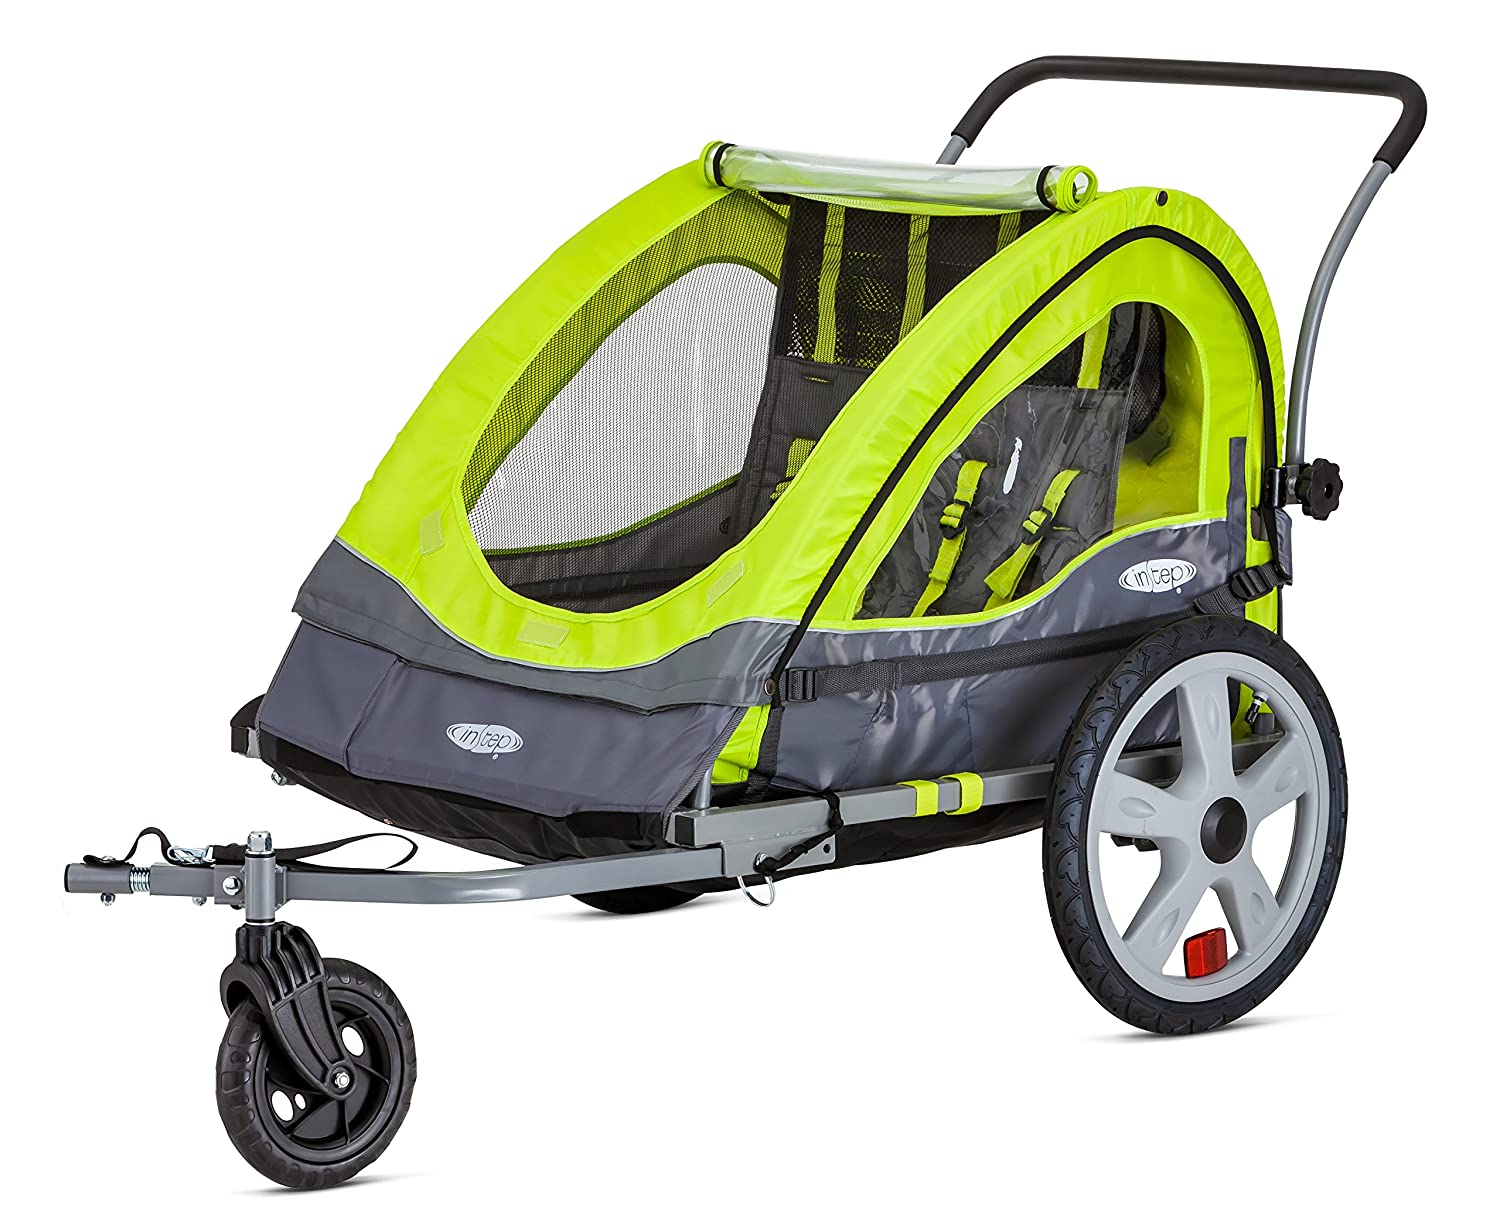 Instep Quick-N-EZ Double Seat Foldable Tow Behind Bike Trailers, Converts to Stroller/Jogger, Featuring 2-in-1 Canopy and 16-Inch Wheels, for Kids and Children, Multiple Colors Available